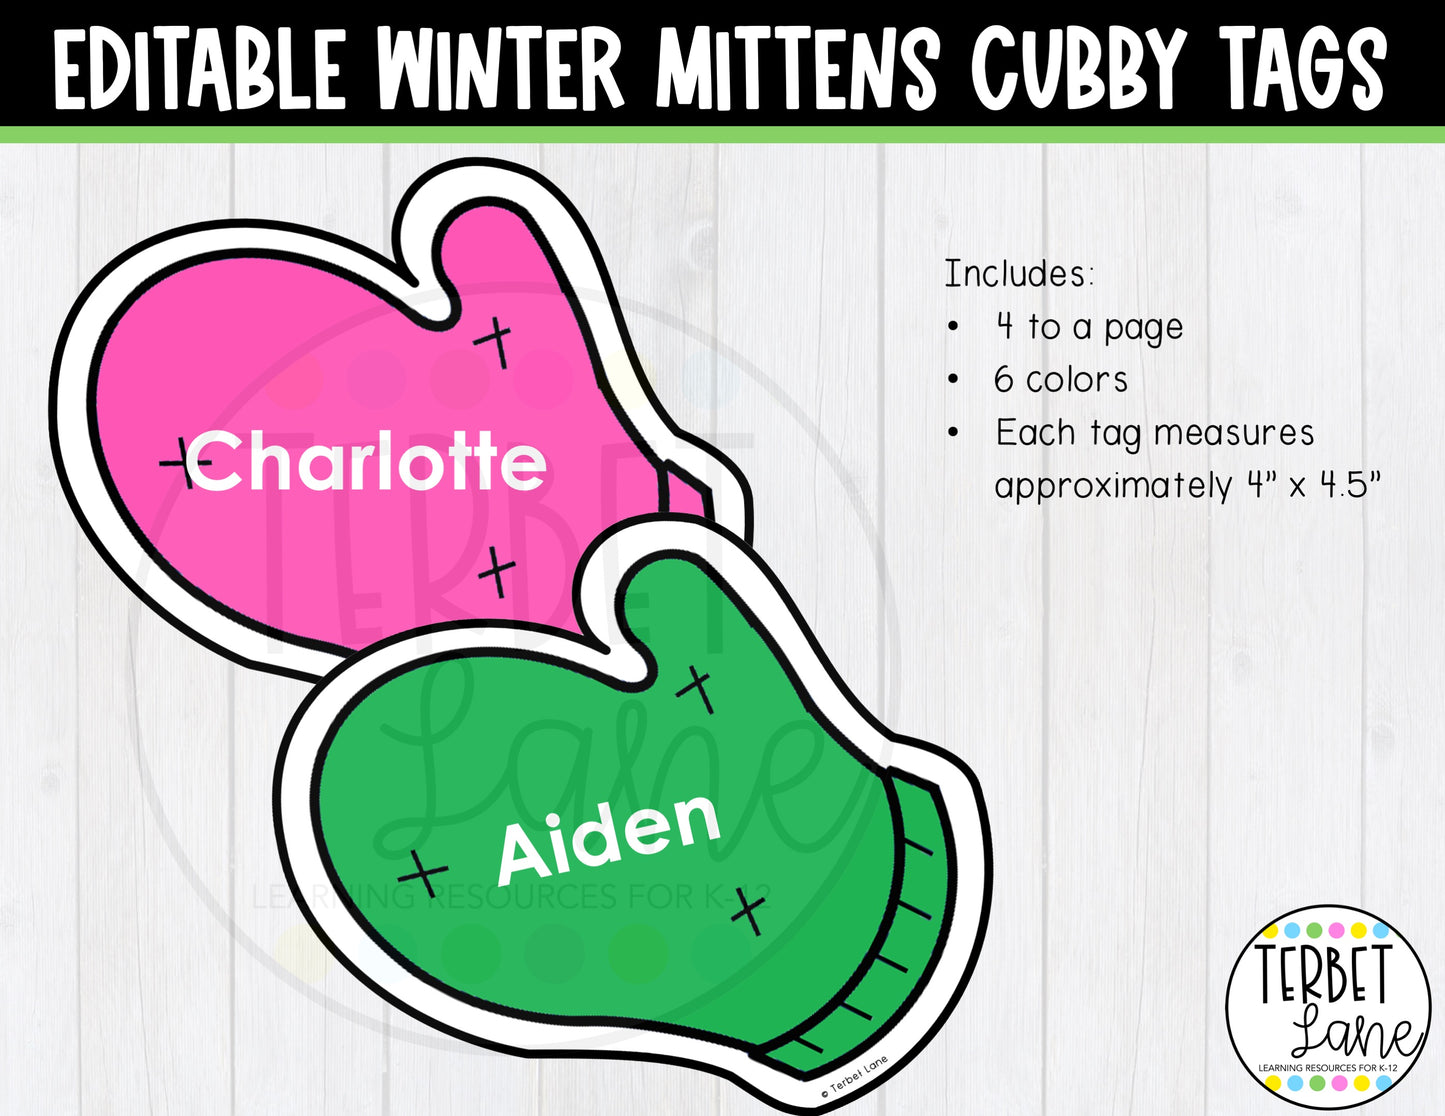 Editable Winter Mittens Cubby Tags